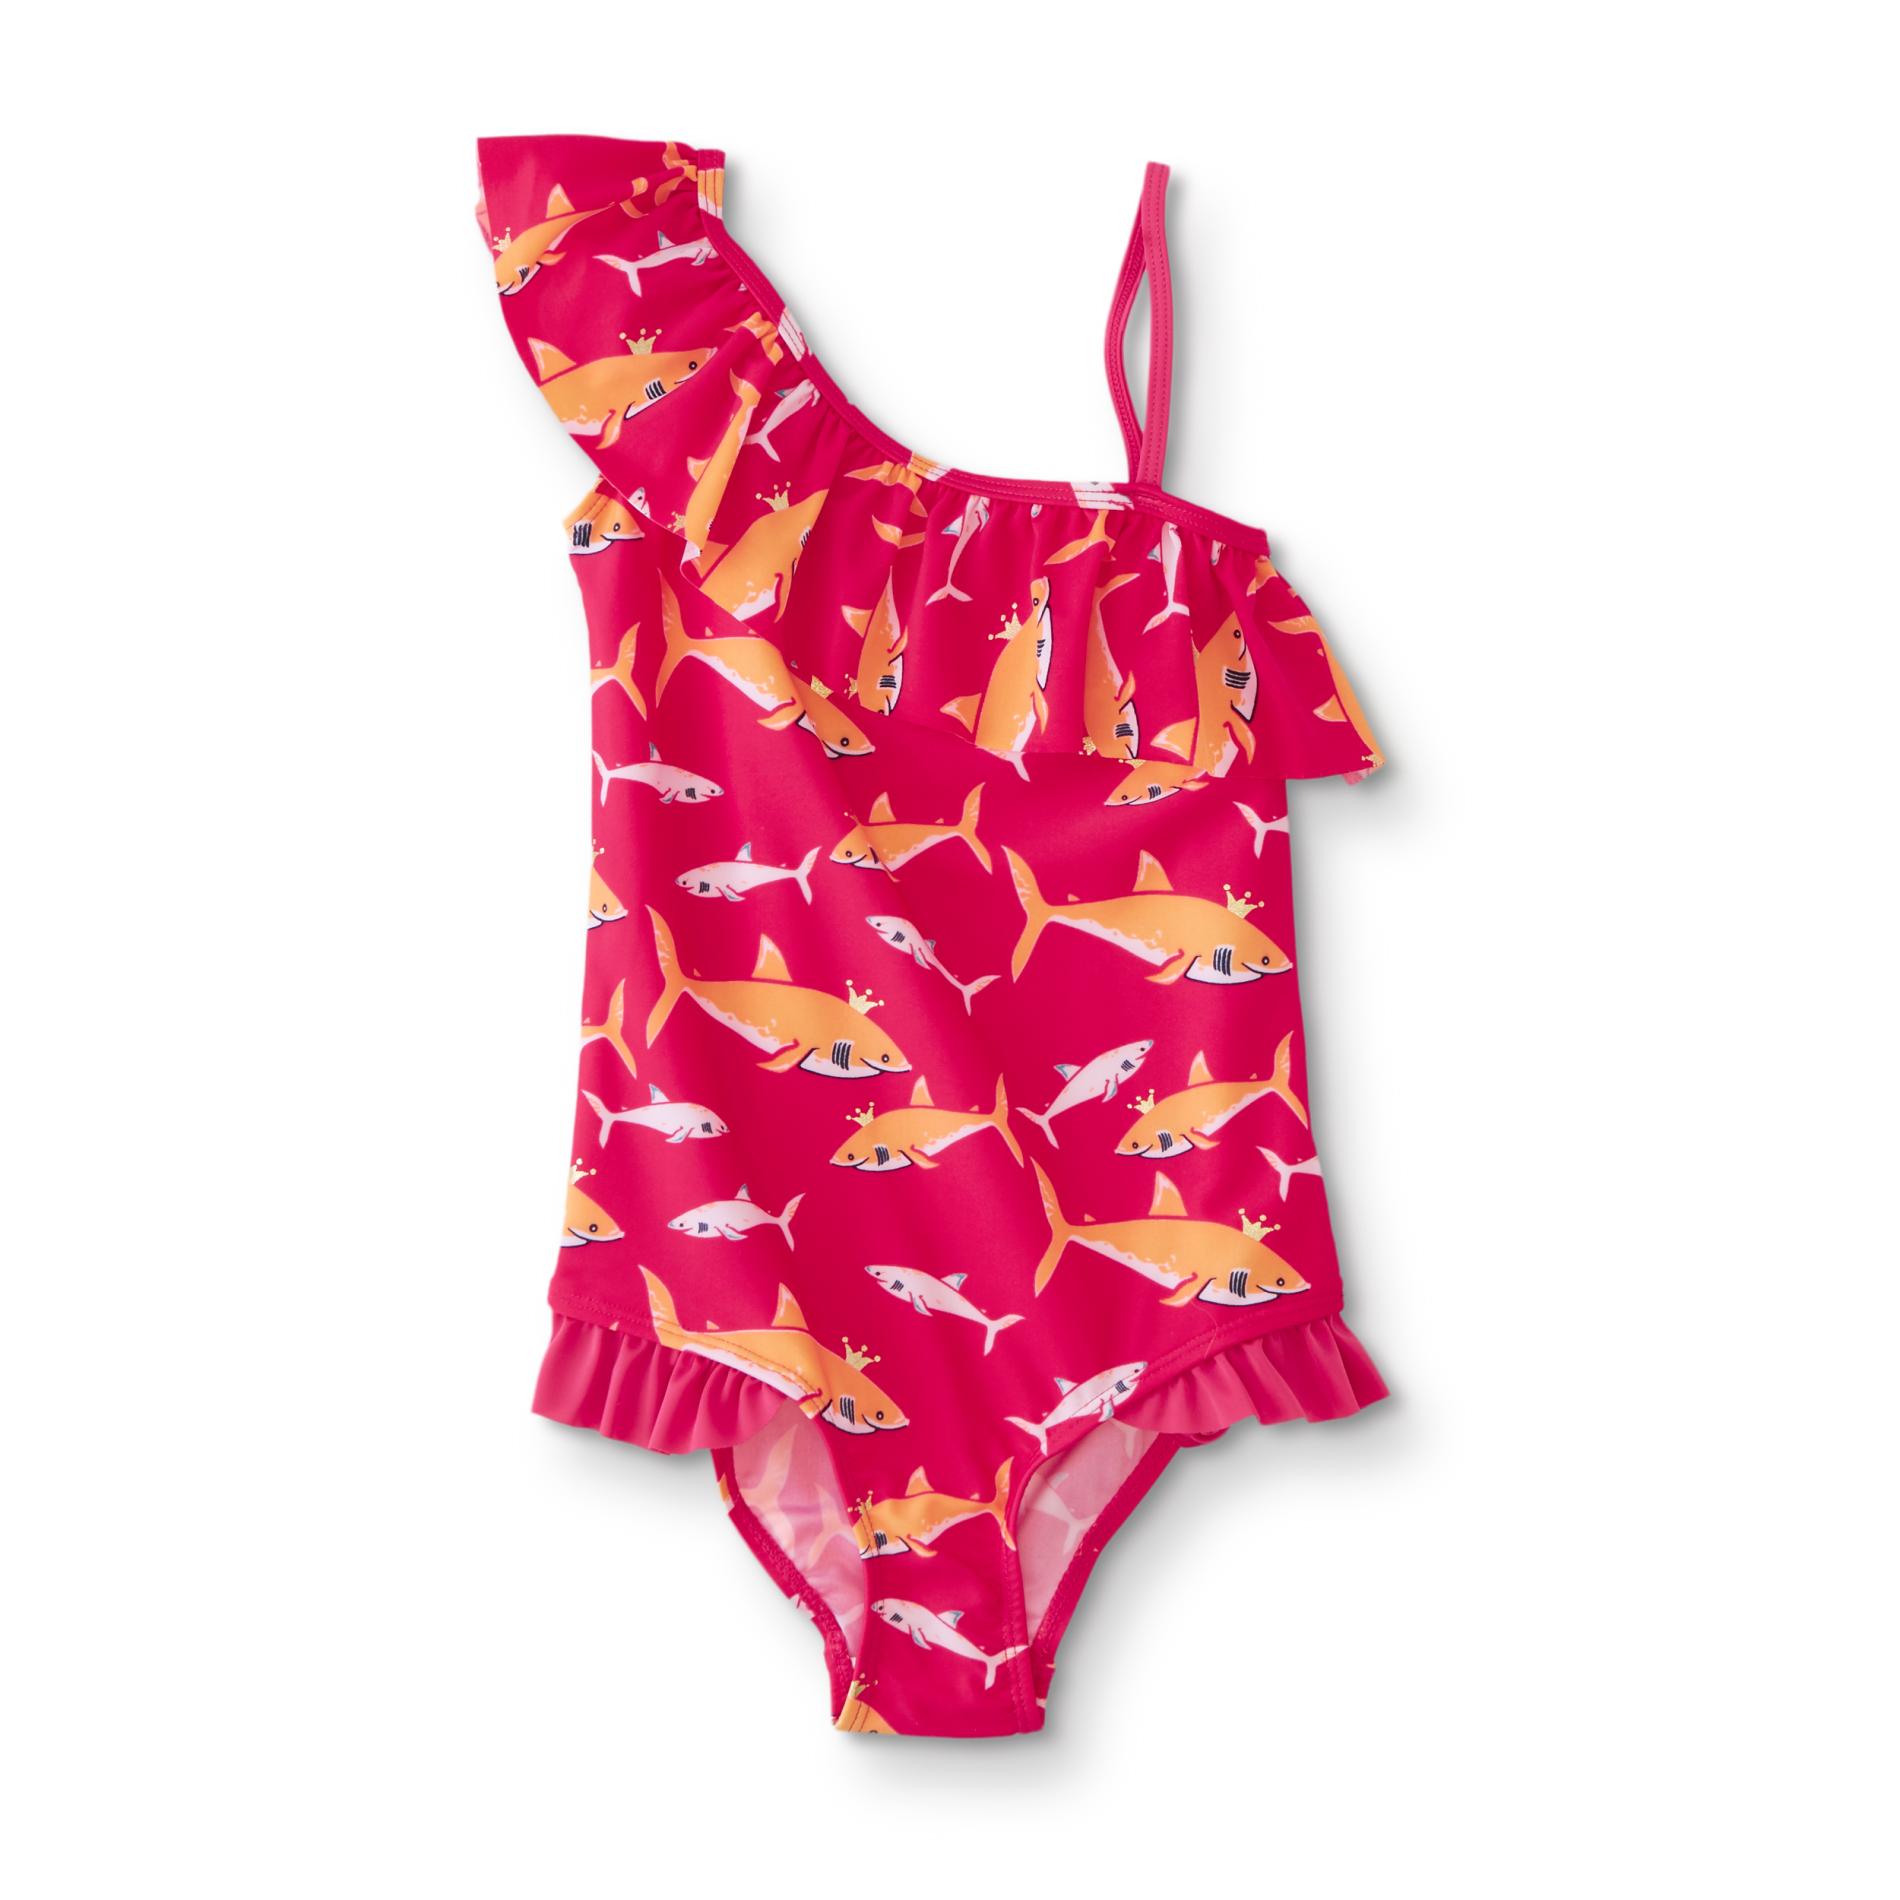 Basic Editions Girls' One-Piece Swimsuit - Sharks